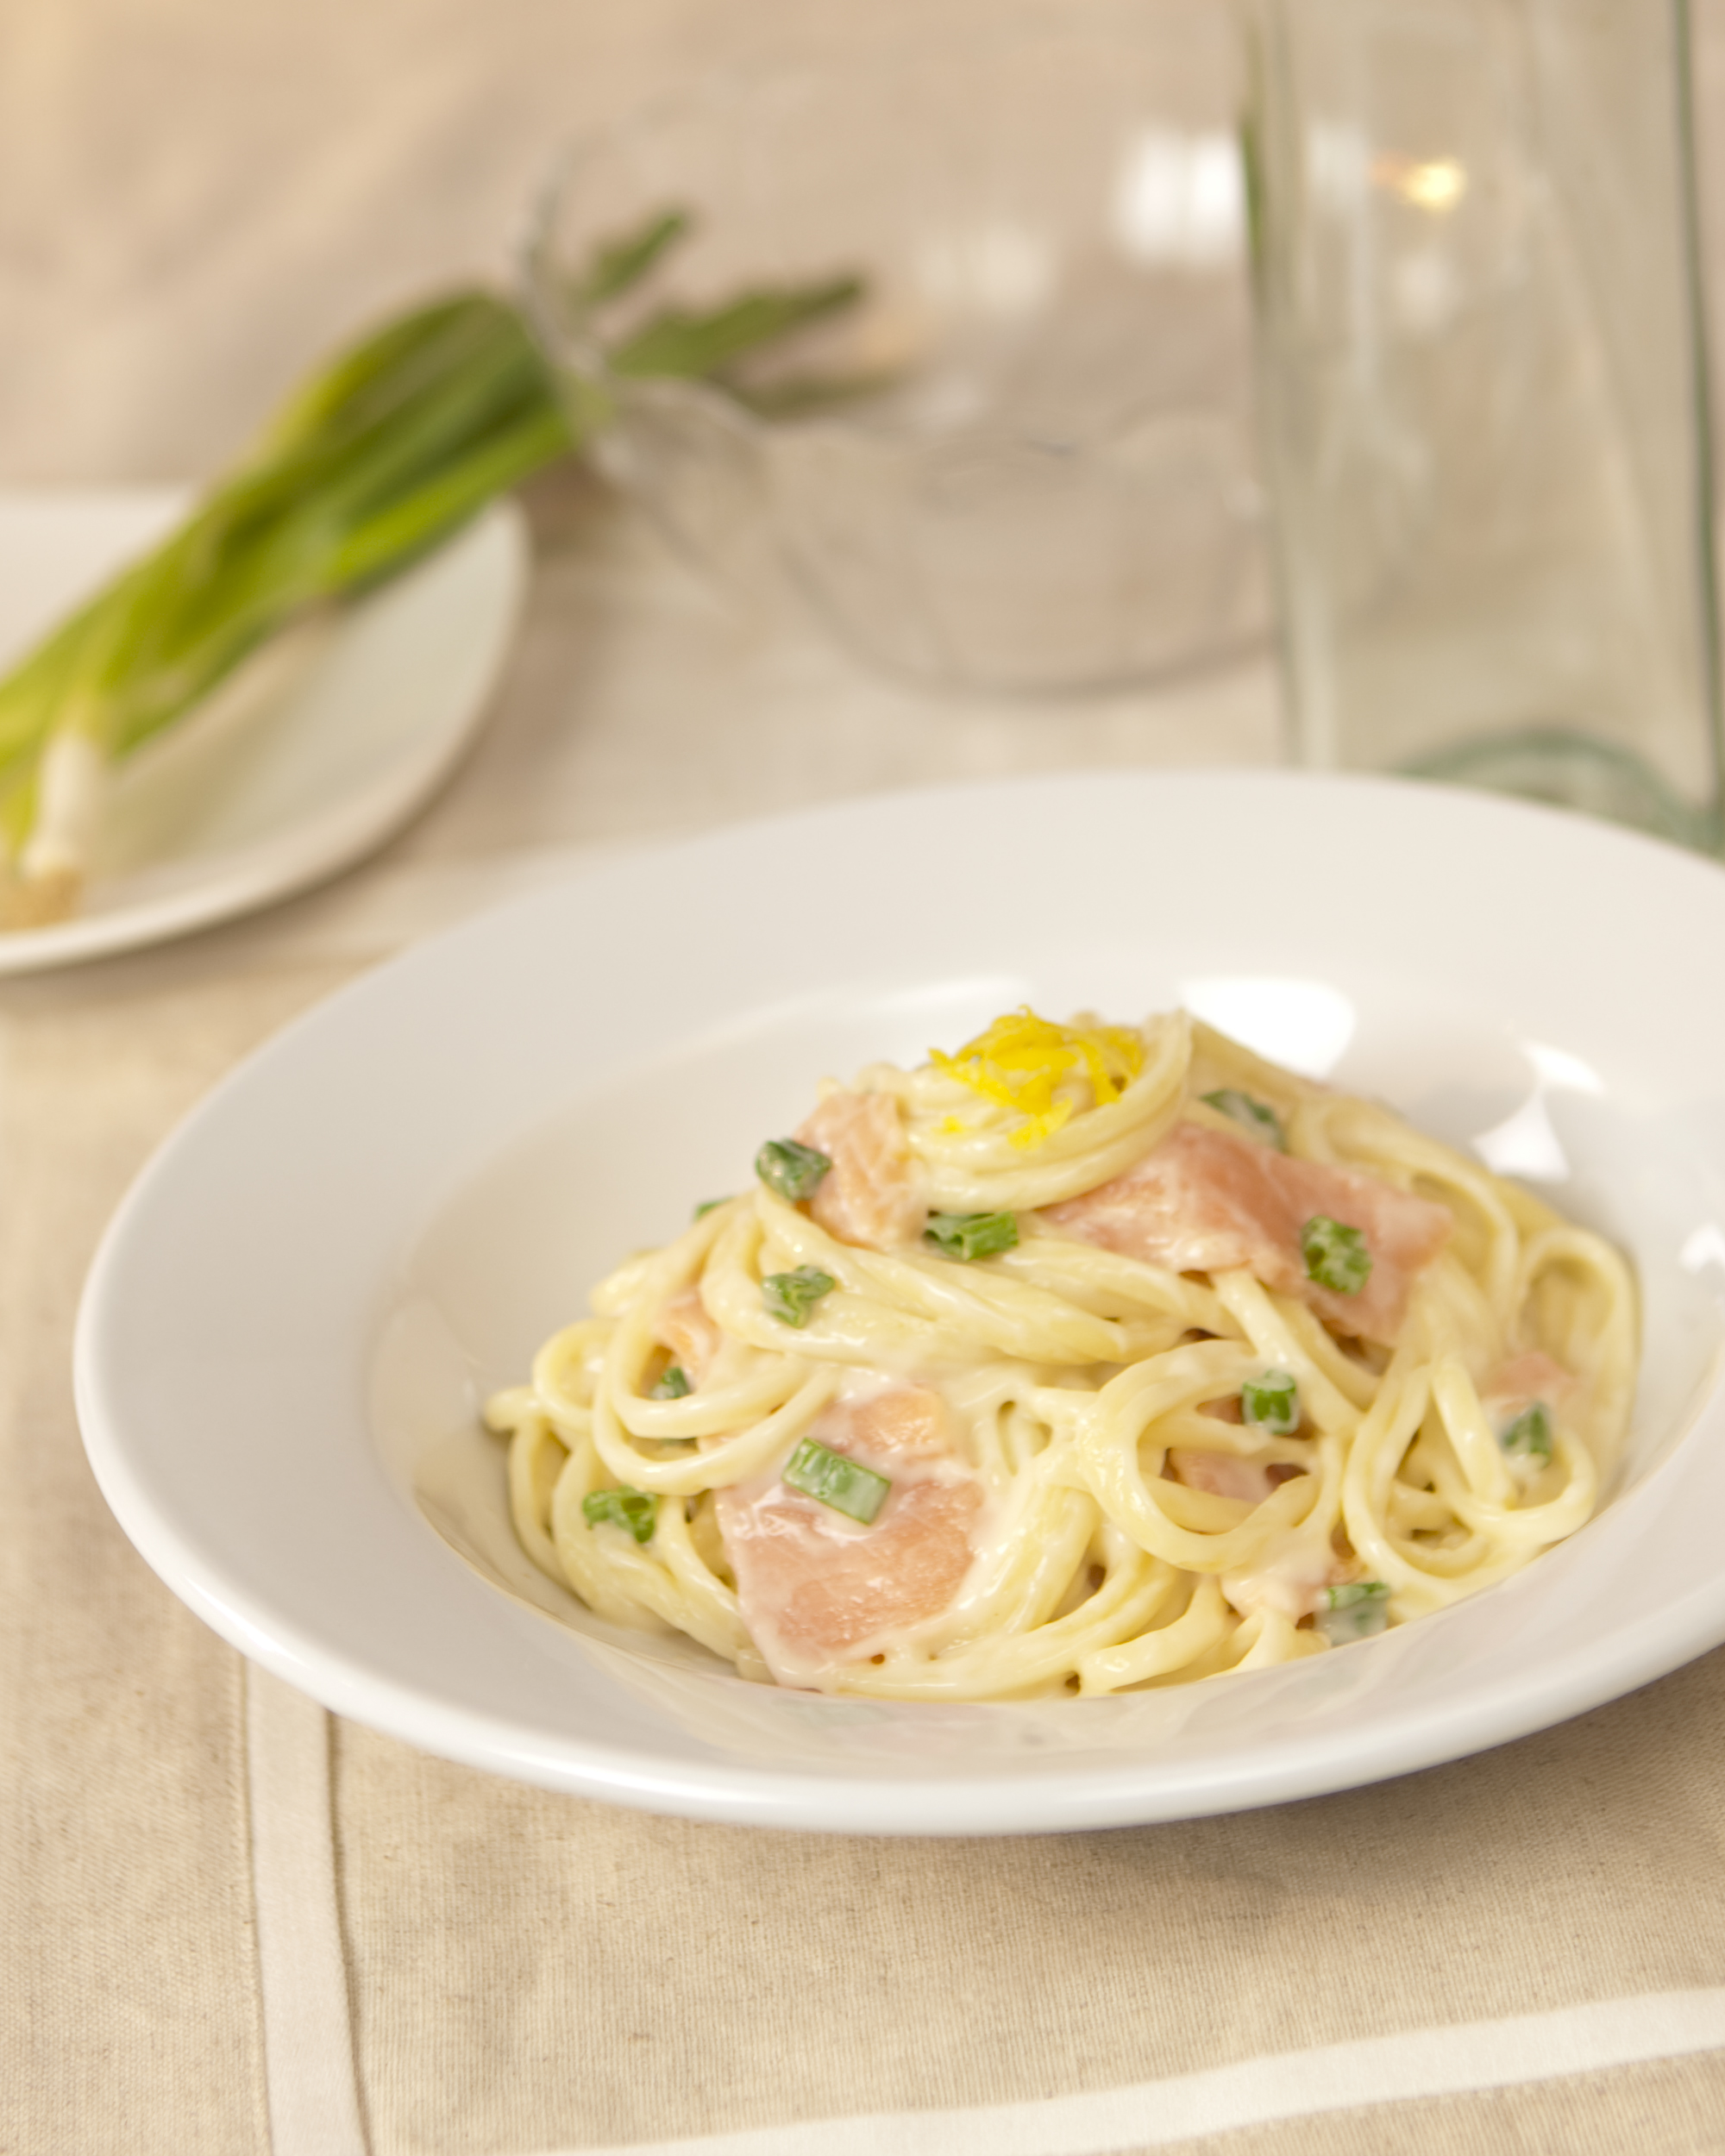 Linguine with smoked salmon coated in Alfredo sauce, topped with lemon zest